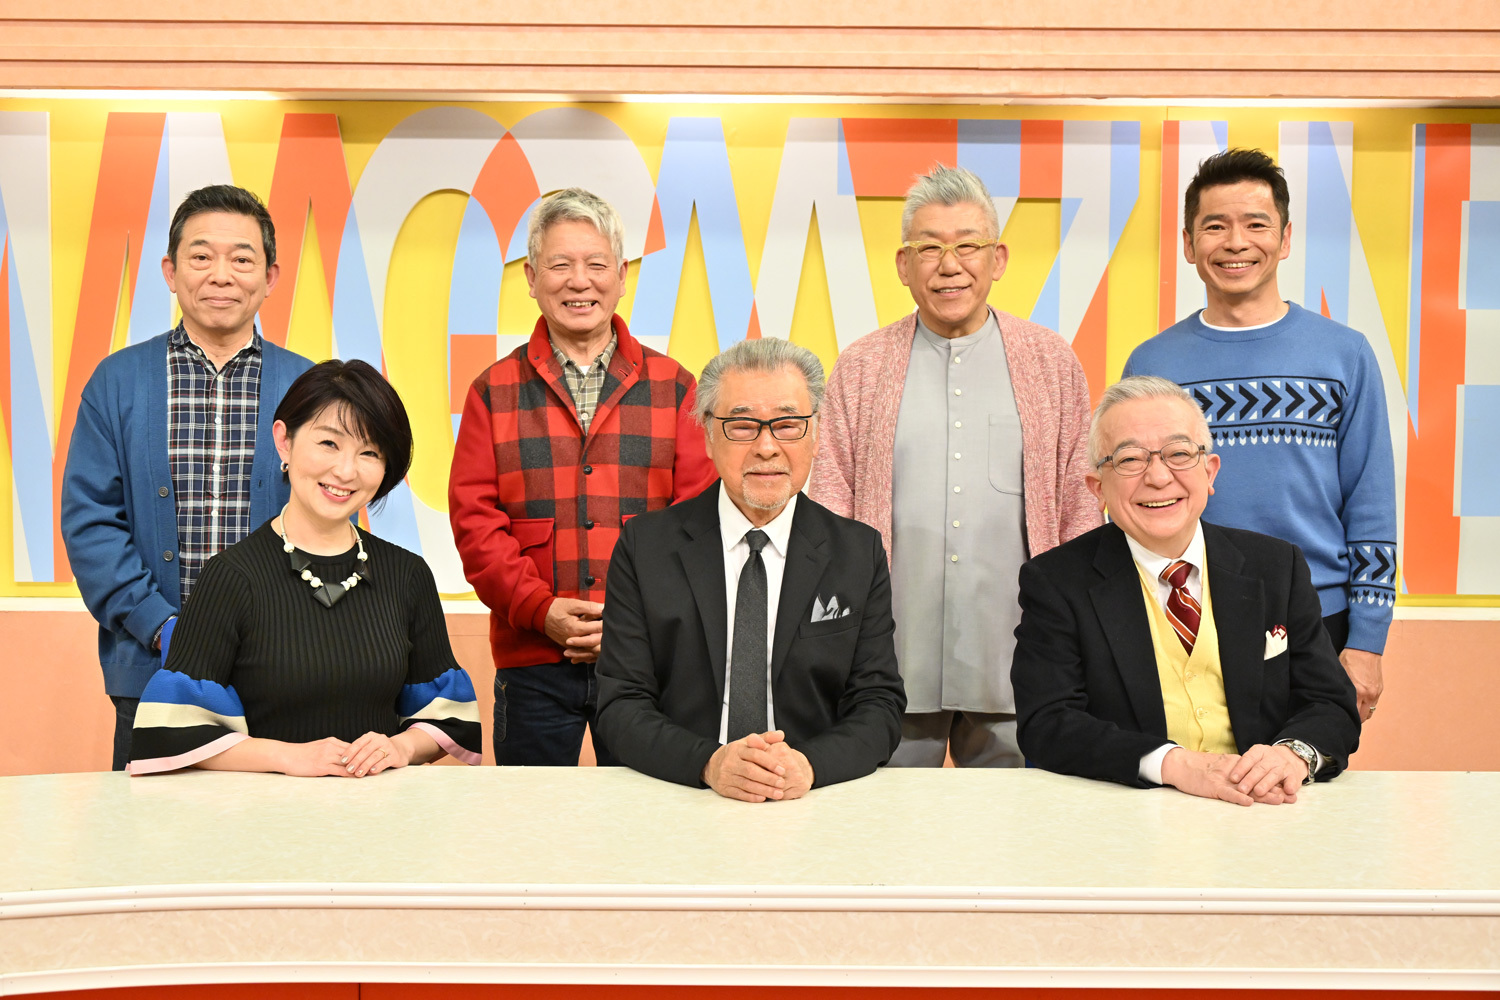 BS-TBS『噂の！東京マガジン』 （C）BS-TBS, INC. All rights reserved.